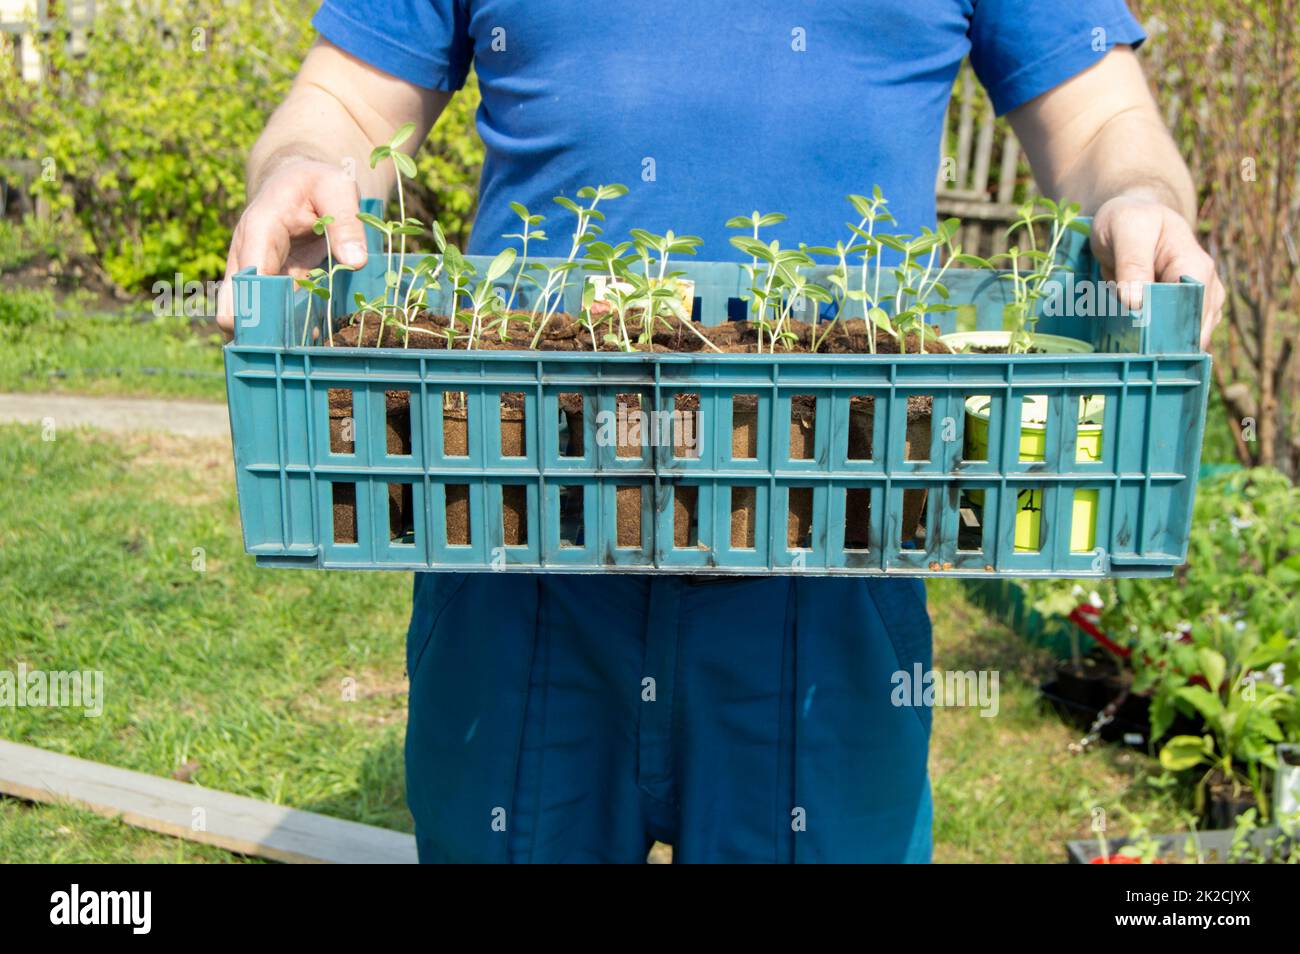 The hands of a young male farmer hold a tray with seedlings of vegetable plants prepared for planting in a greenhouse or vegetable garden, the concept of growing organic vegetables Stock Photo